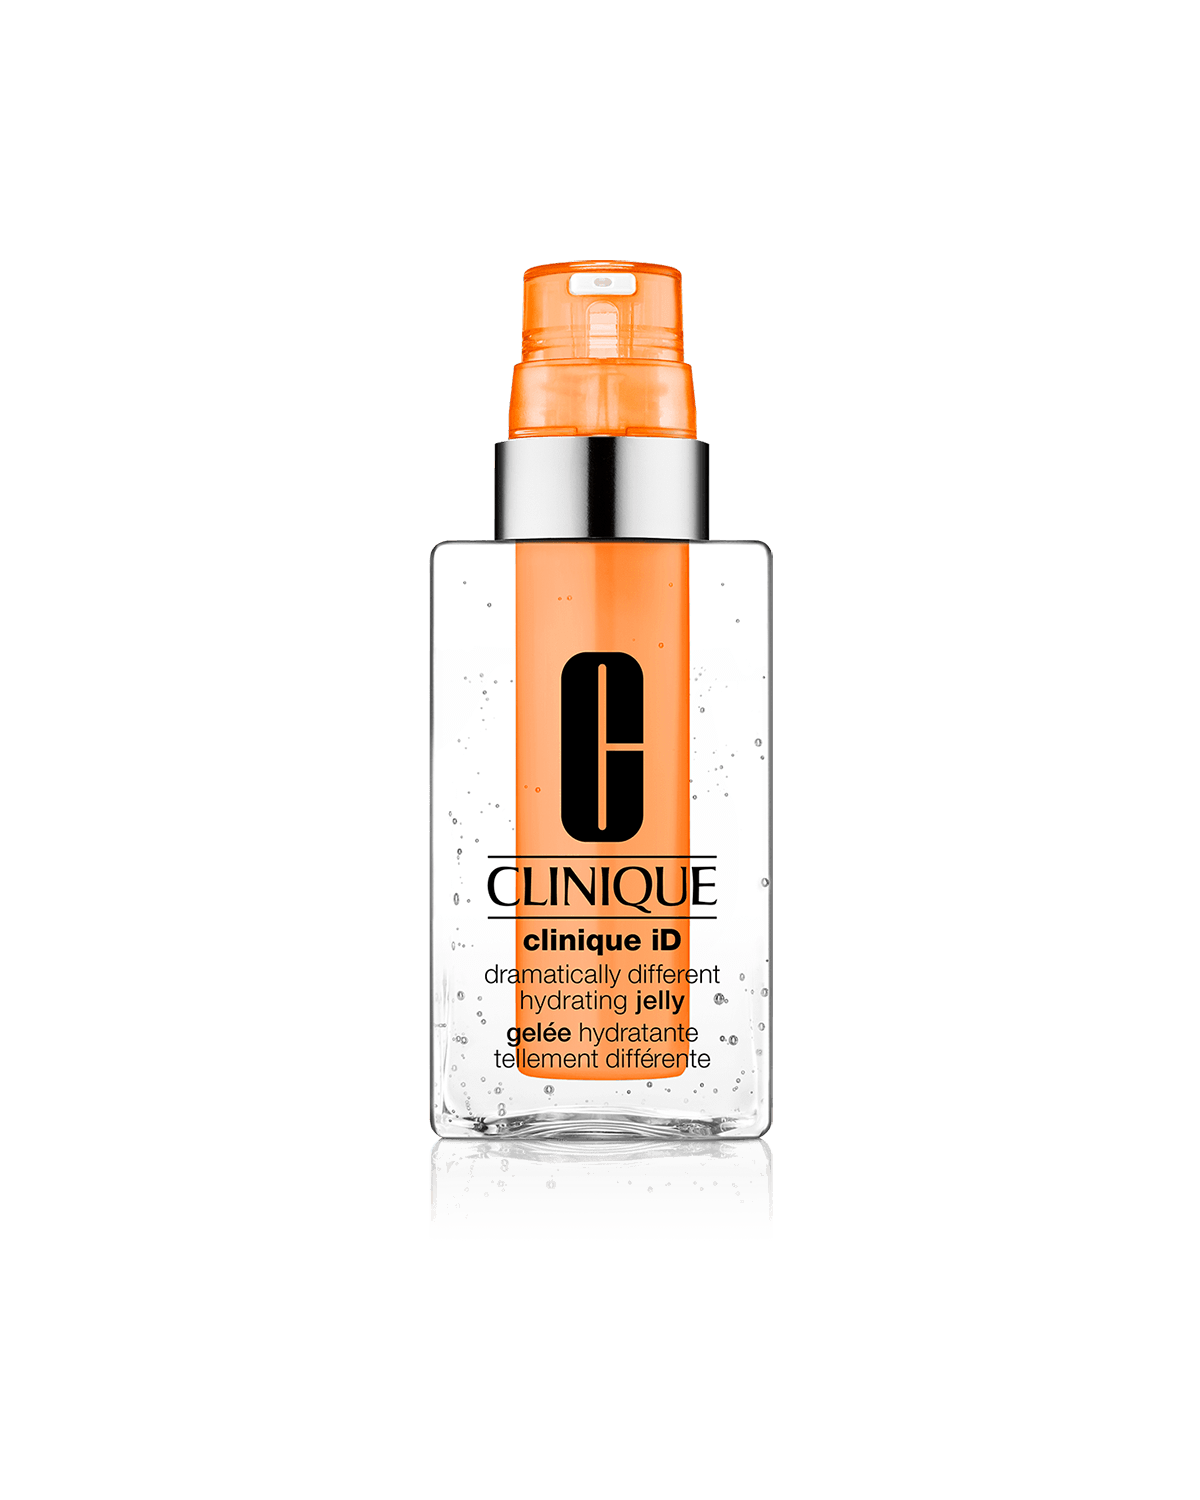 Clinique iD™: Dramatically Different Hydrating Jelly ™ + Active Cartridge Concentrate for Fatigue